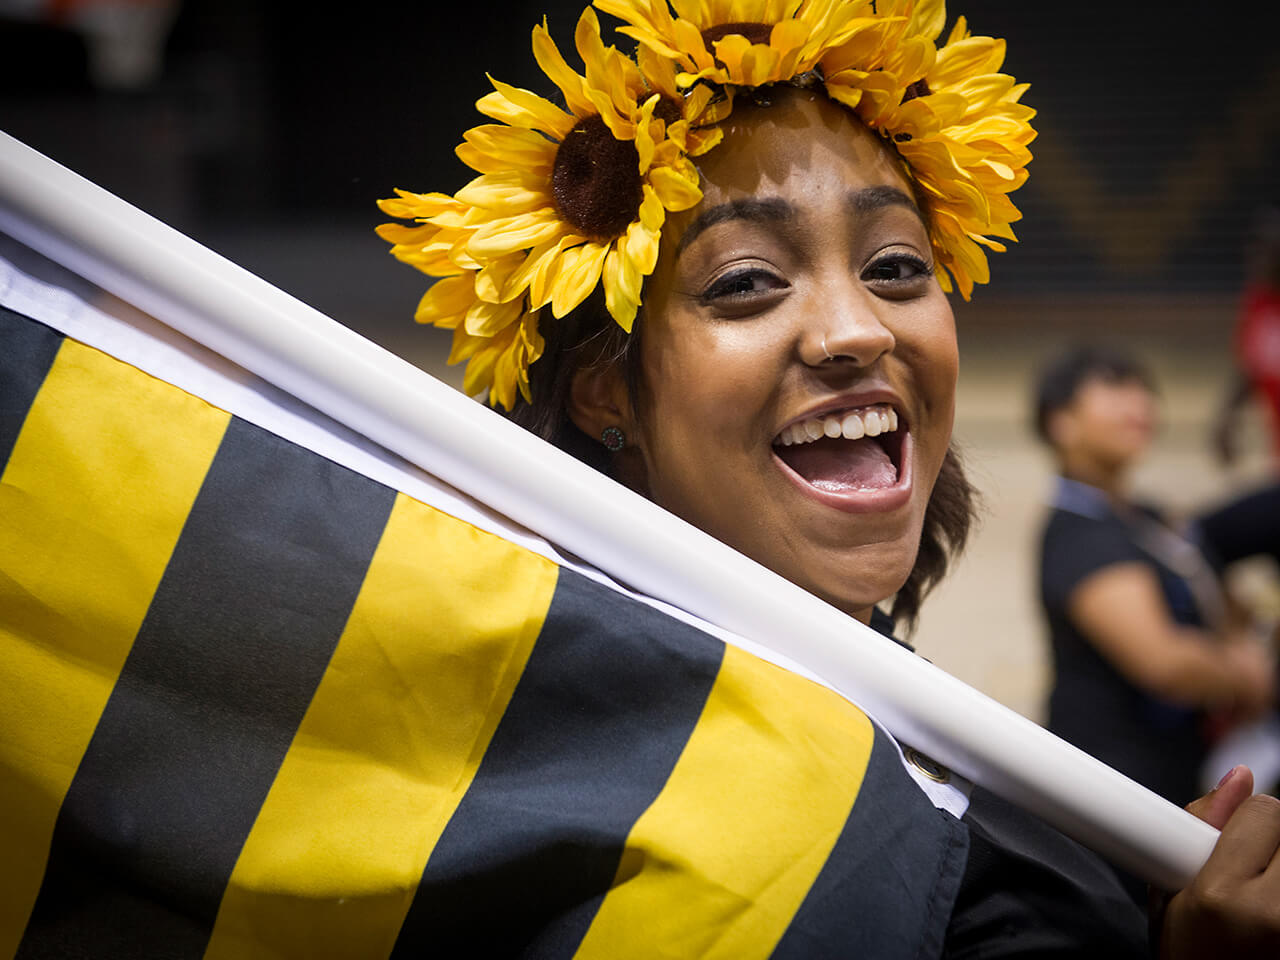 Student with flowers in her hair holding a gold and black flag